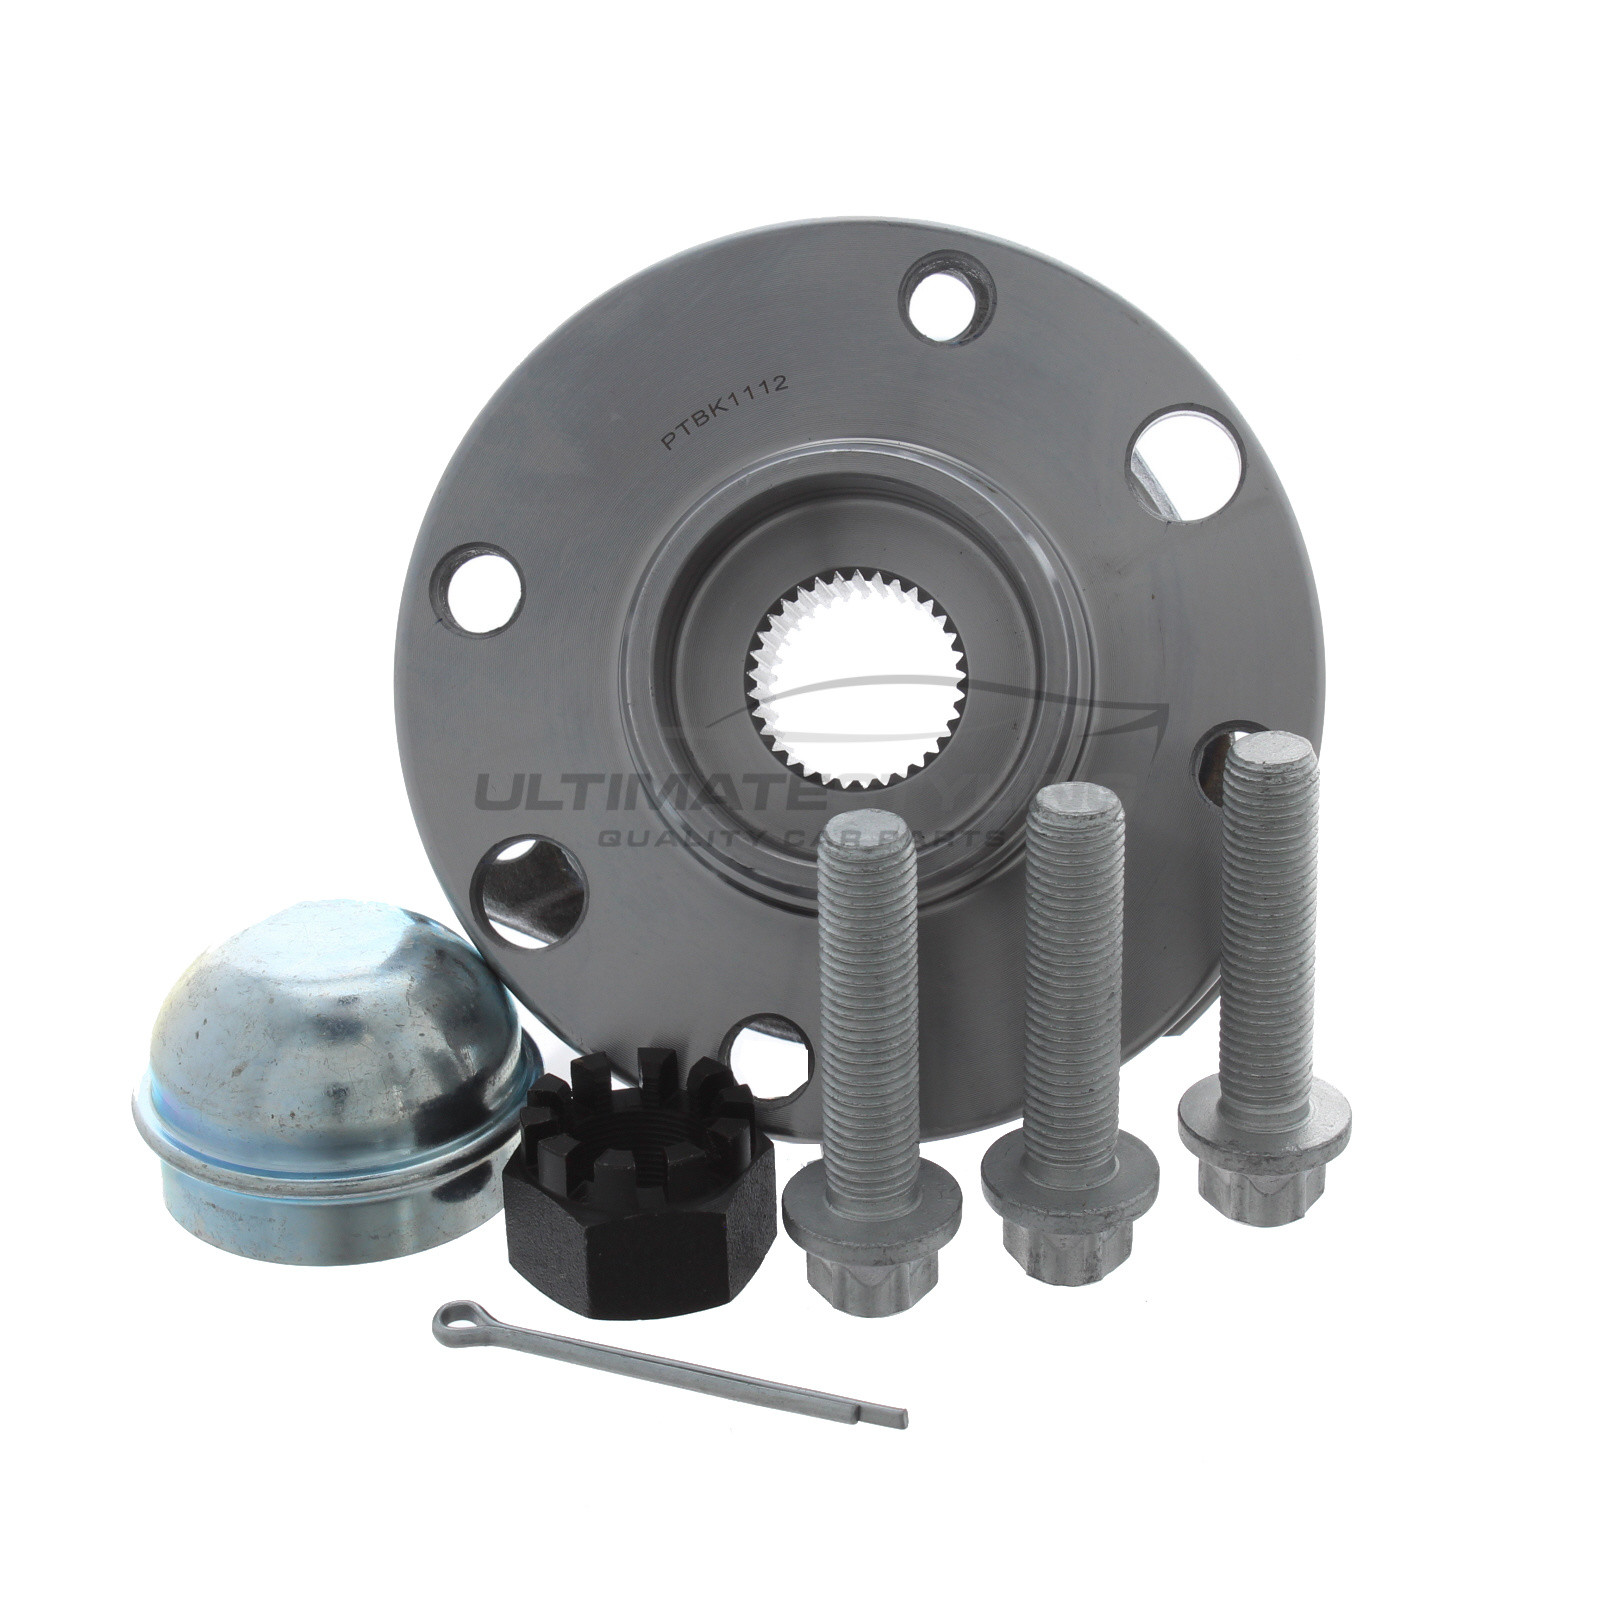 Front <span style="color:red;"><strong>OR</strong></span> Rear Hub Bearing Kit for Lotus Elise